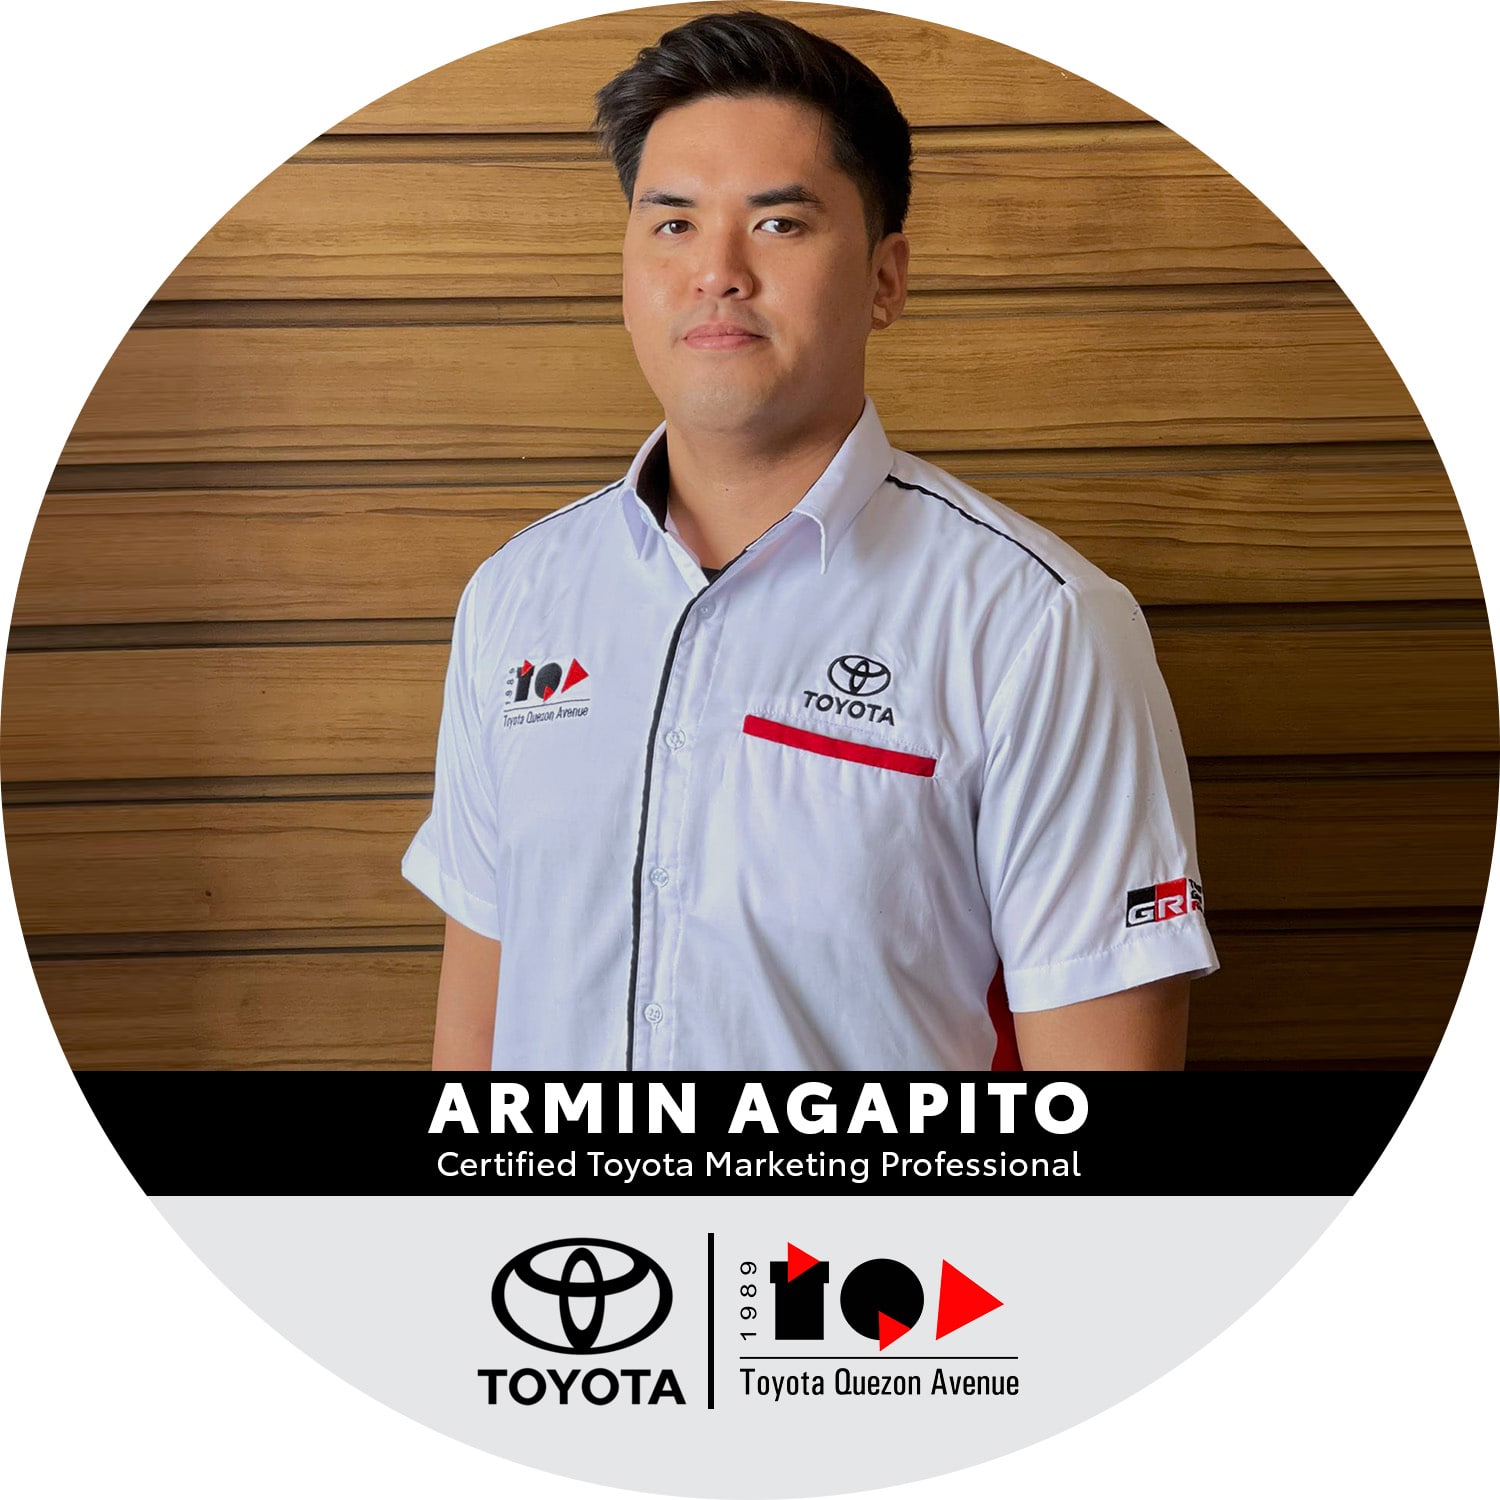 Certified Toyota Marketing Professionals - Armin Agapito